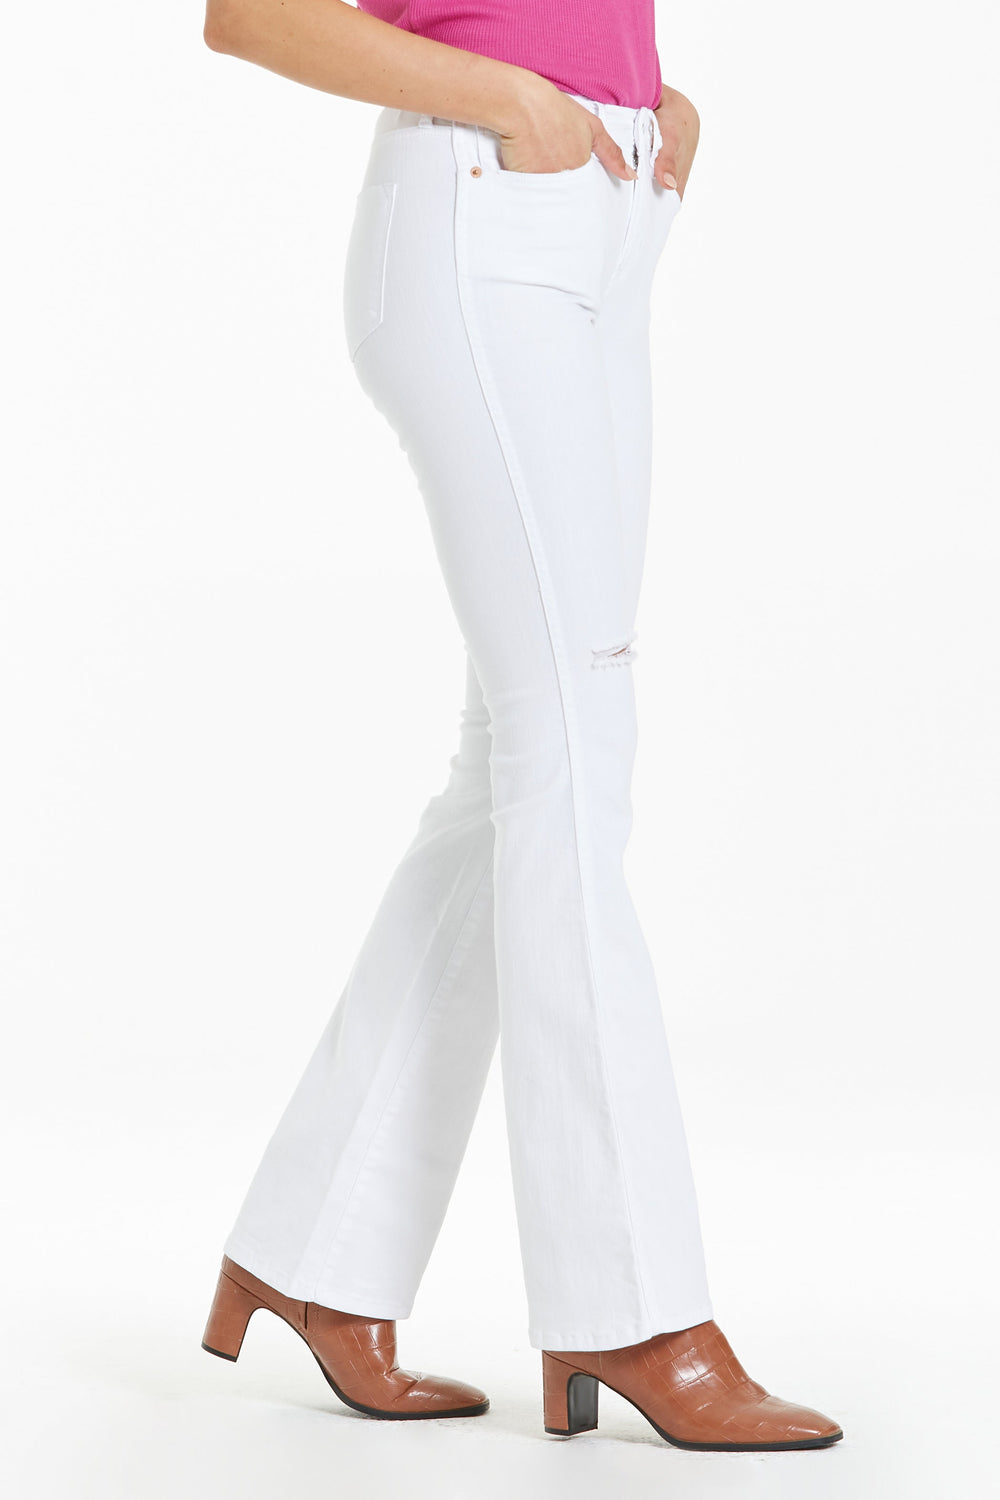 image of a female model wearing a JAXTYN HIGH RISE BOOTCUT JEANS OPTIC WHITE JEANS